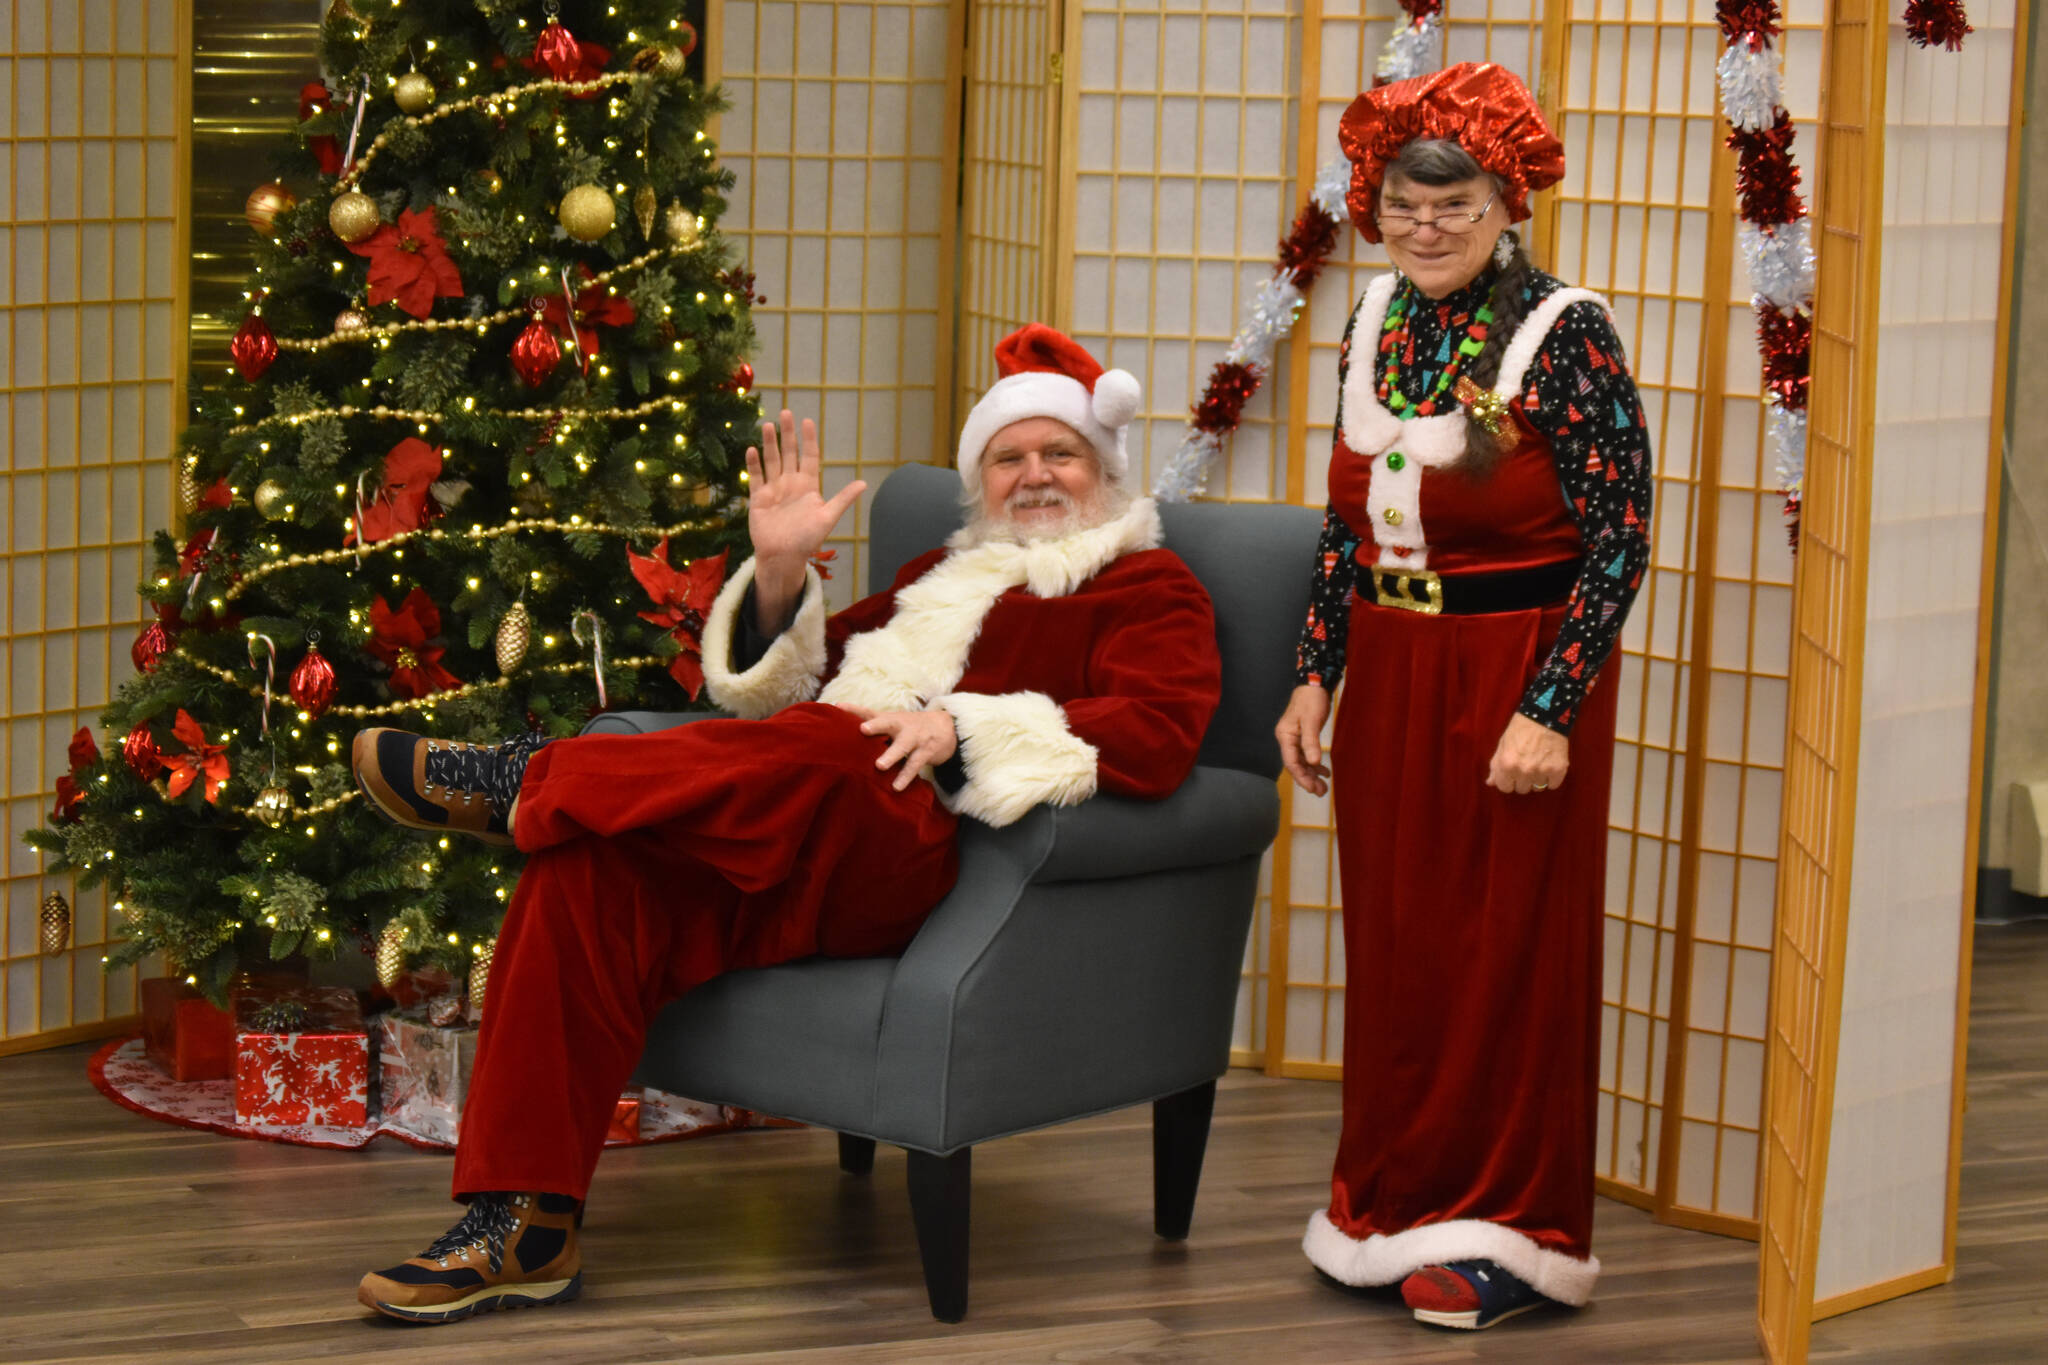 Santa, played by Ken Aaron, and Mrs. Claus, played by Kit Hill, wait for children to arrive during Breakfast with Santa at the Kenai Senior Center in Kenai, Alaska, on Monday, Dec. 19, 2022. (Jake Dye/Peninsula Clarion)